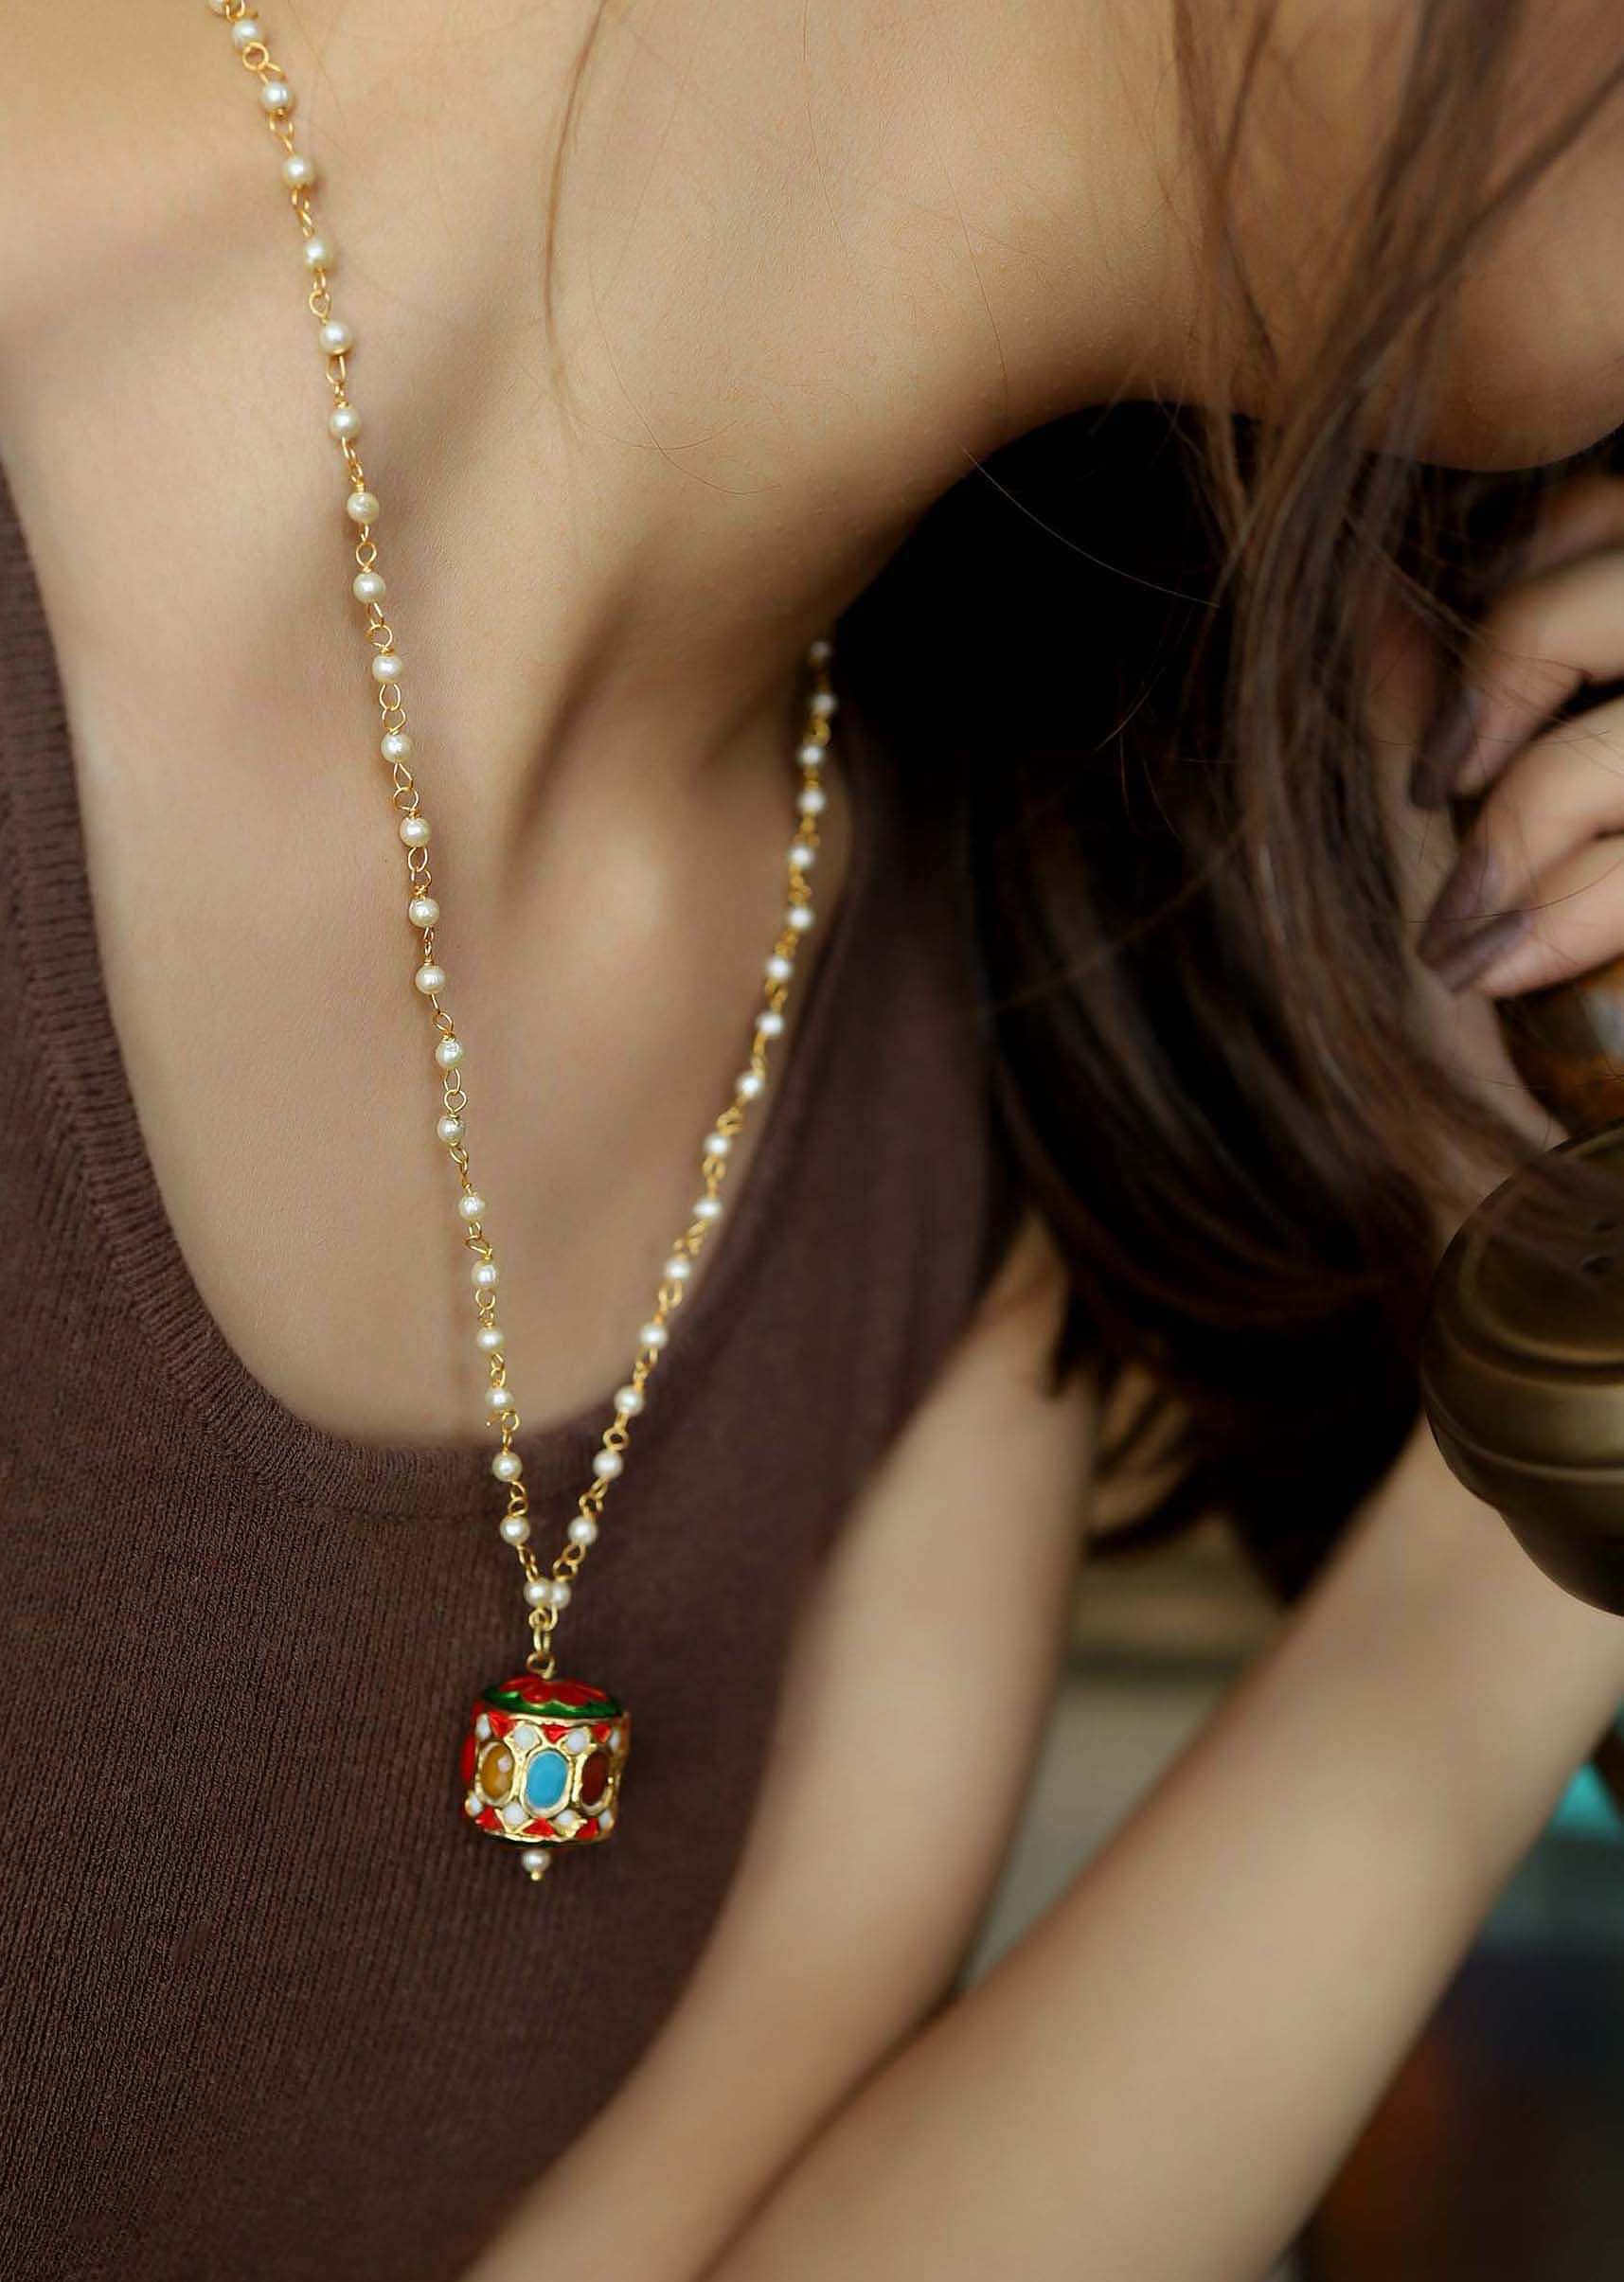 Multi Colored Necklace With Pearl Chain And Intricate Navratna Pendant In The Centre